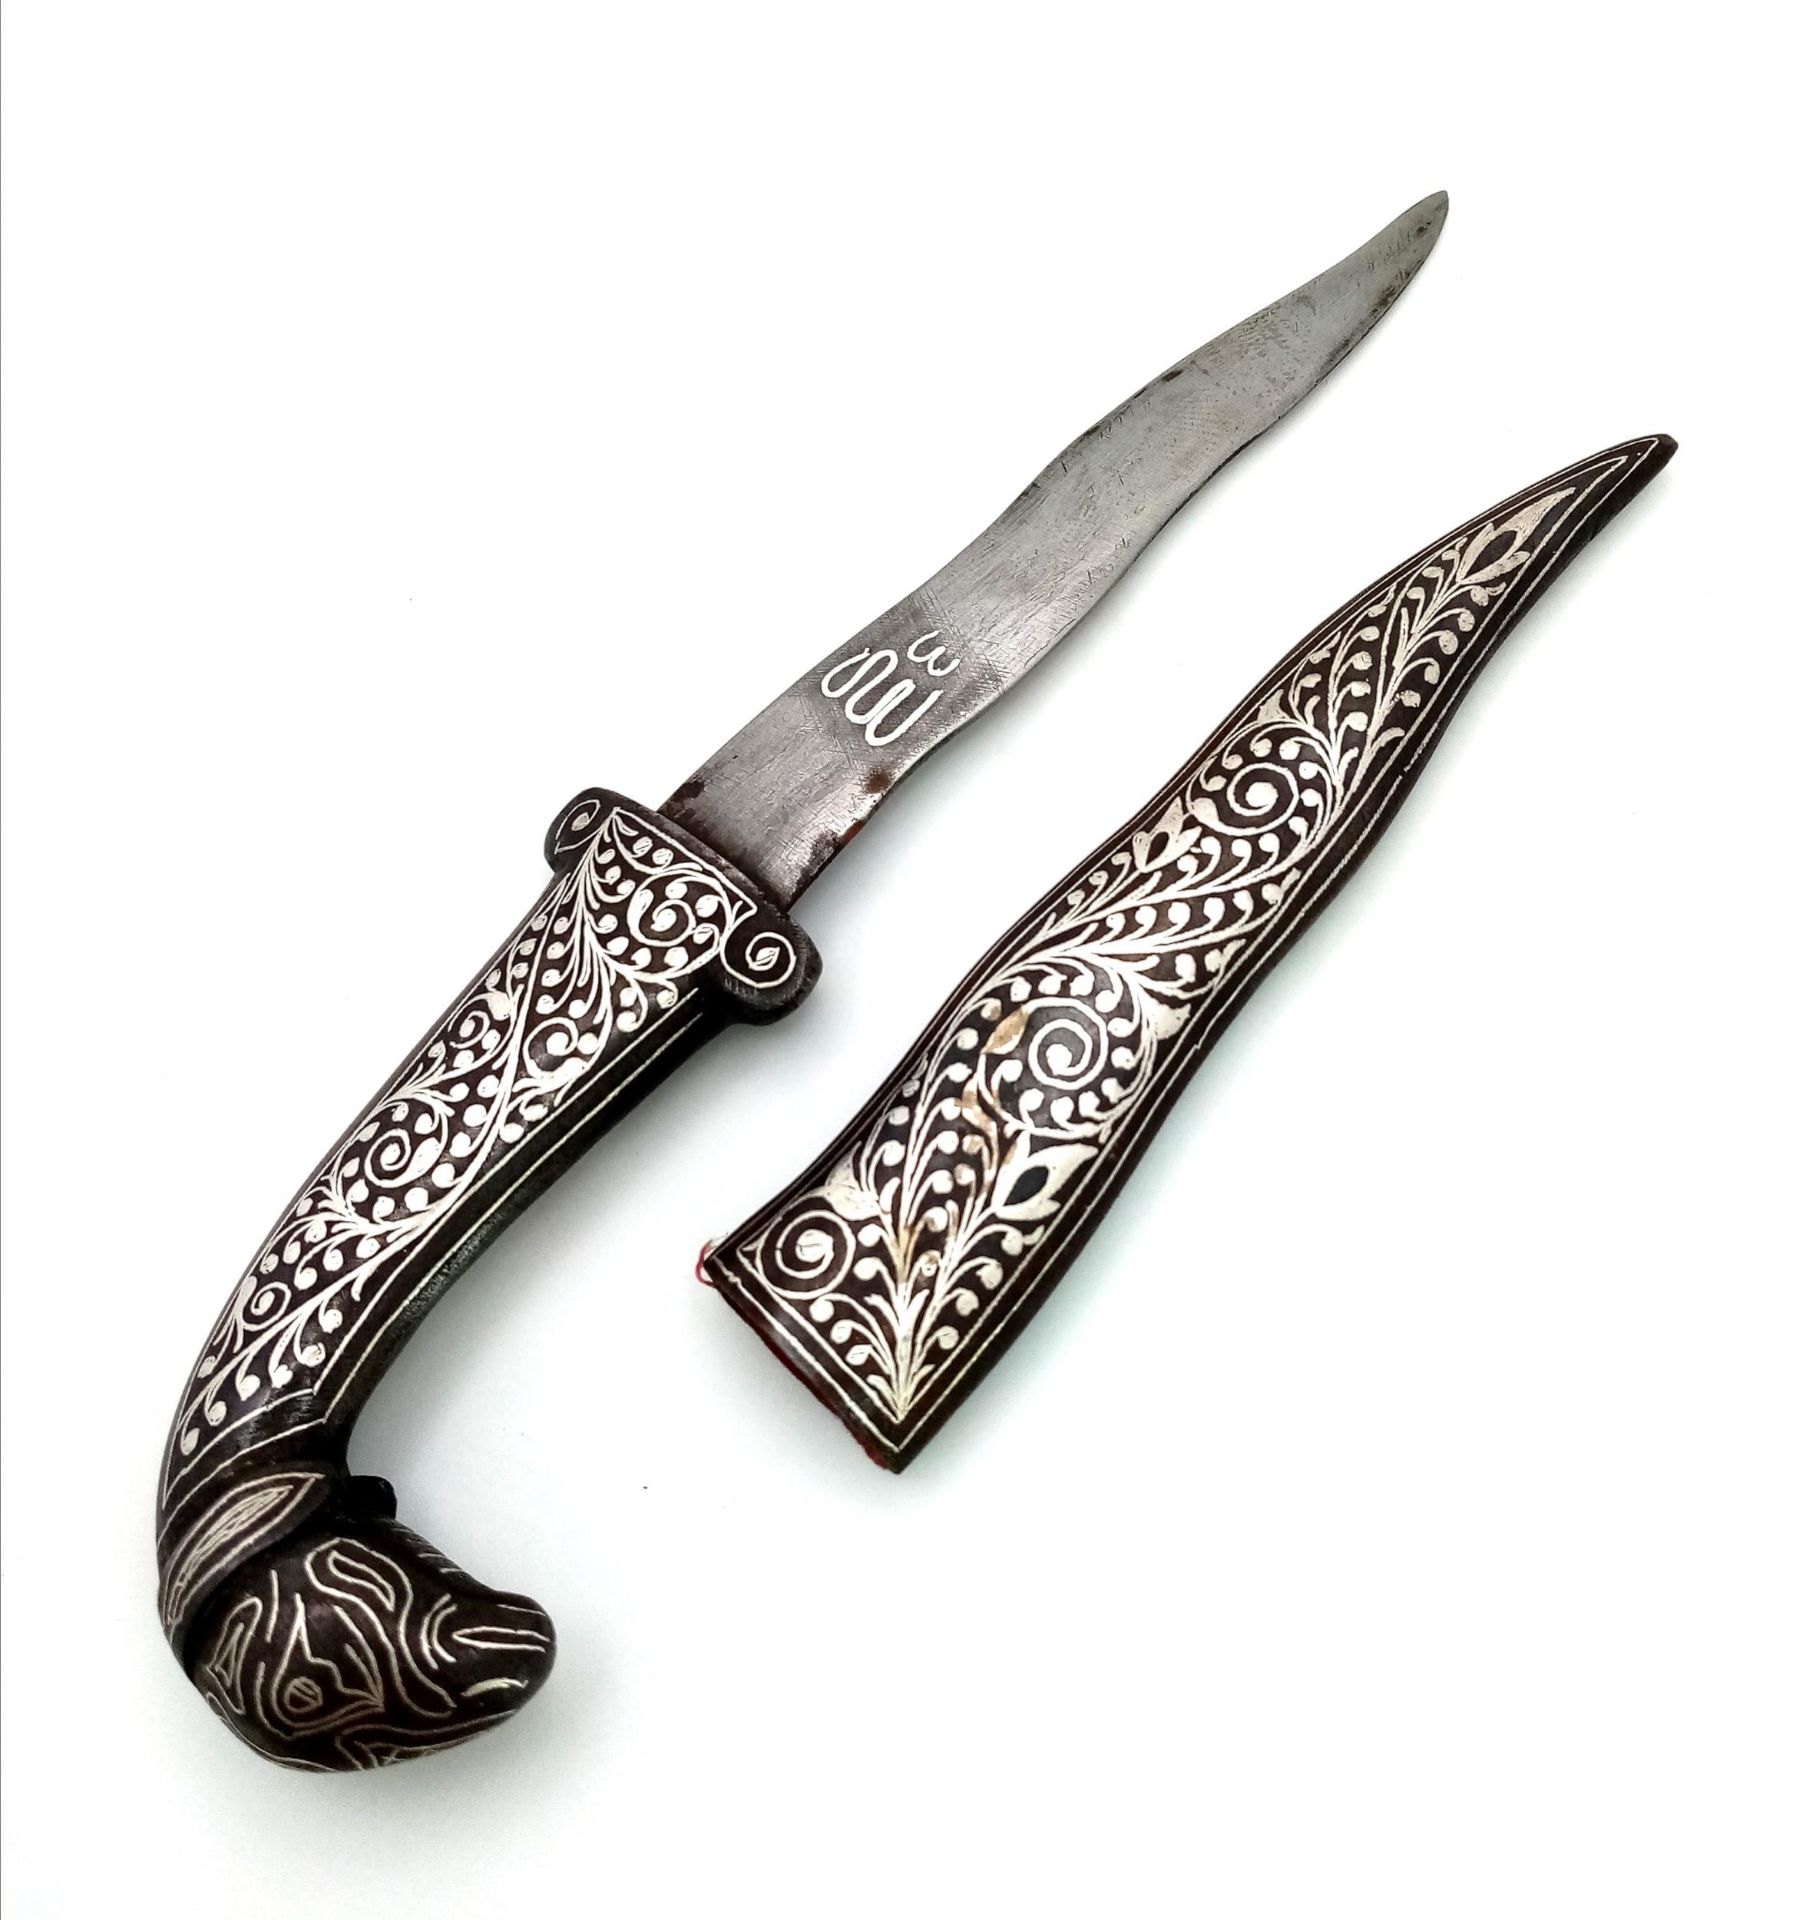 Vintage or Most Likely Antique, Ornate Scroll Detail Ram’s Head Mughal White Metal Dagger with